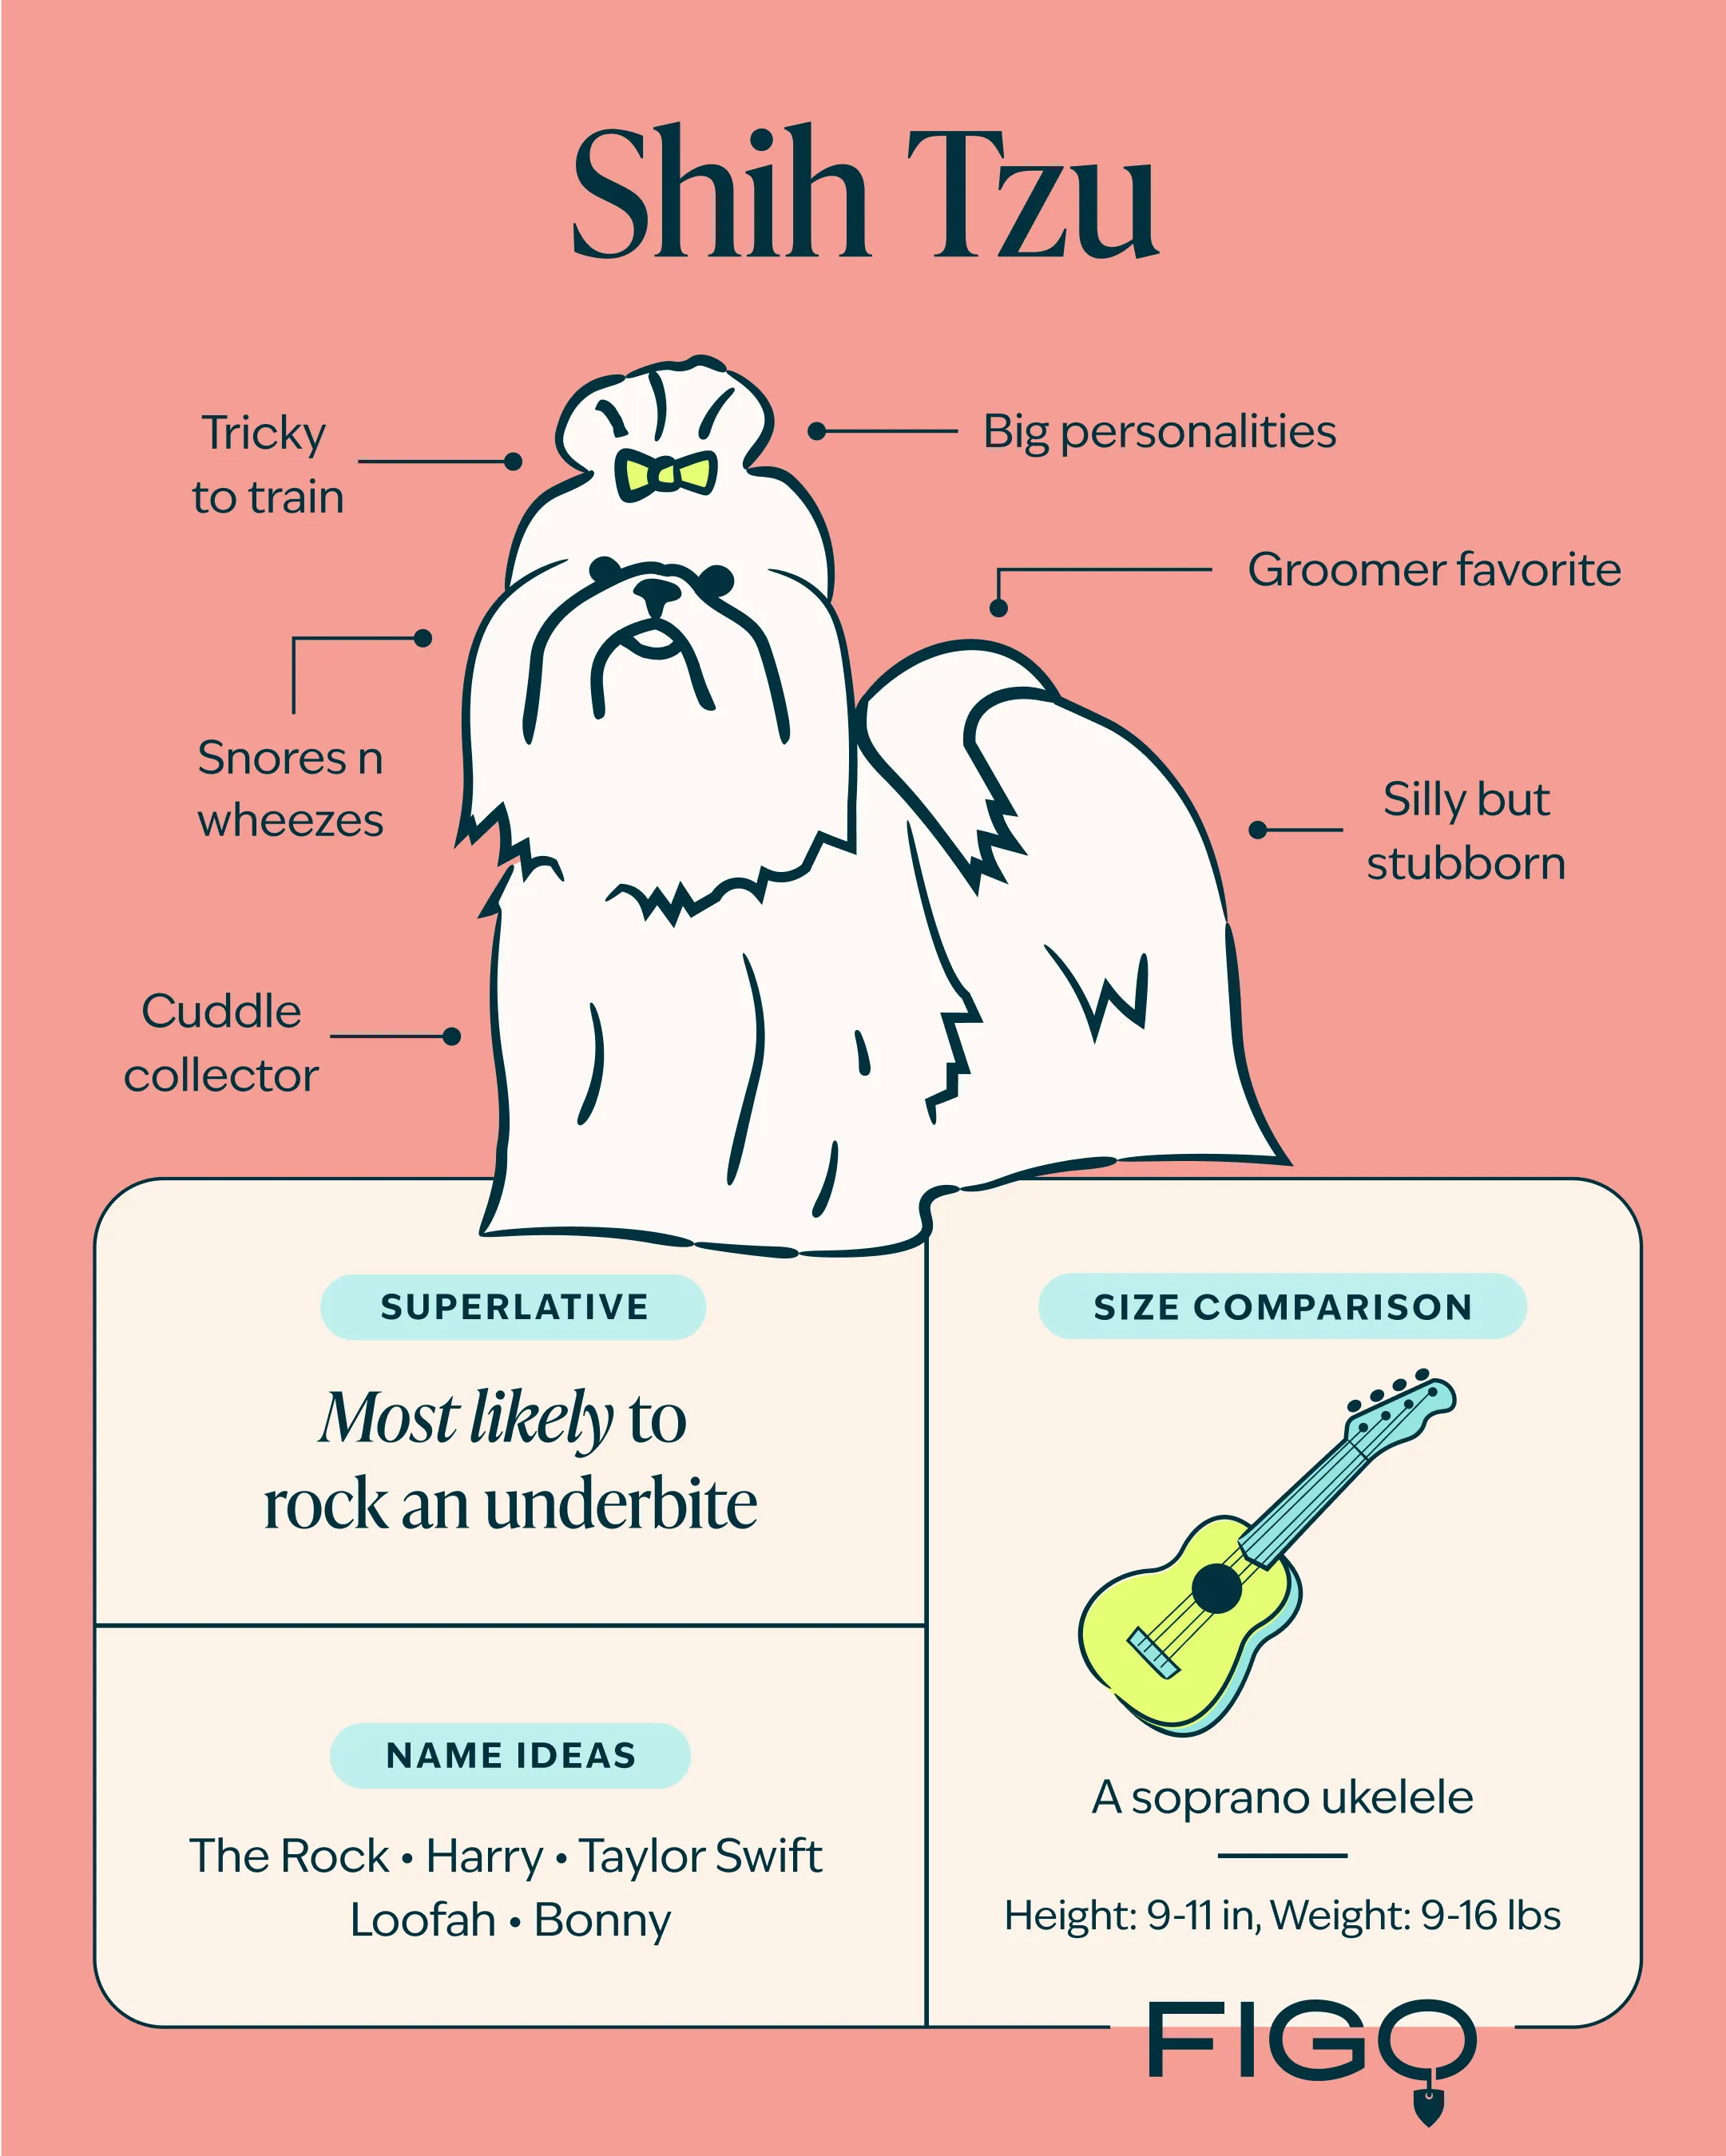 Shih Tzu Breed guide infographic